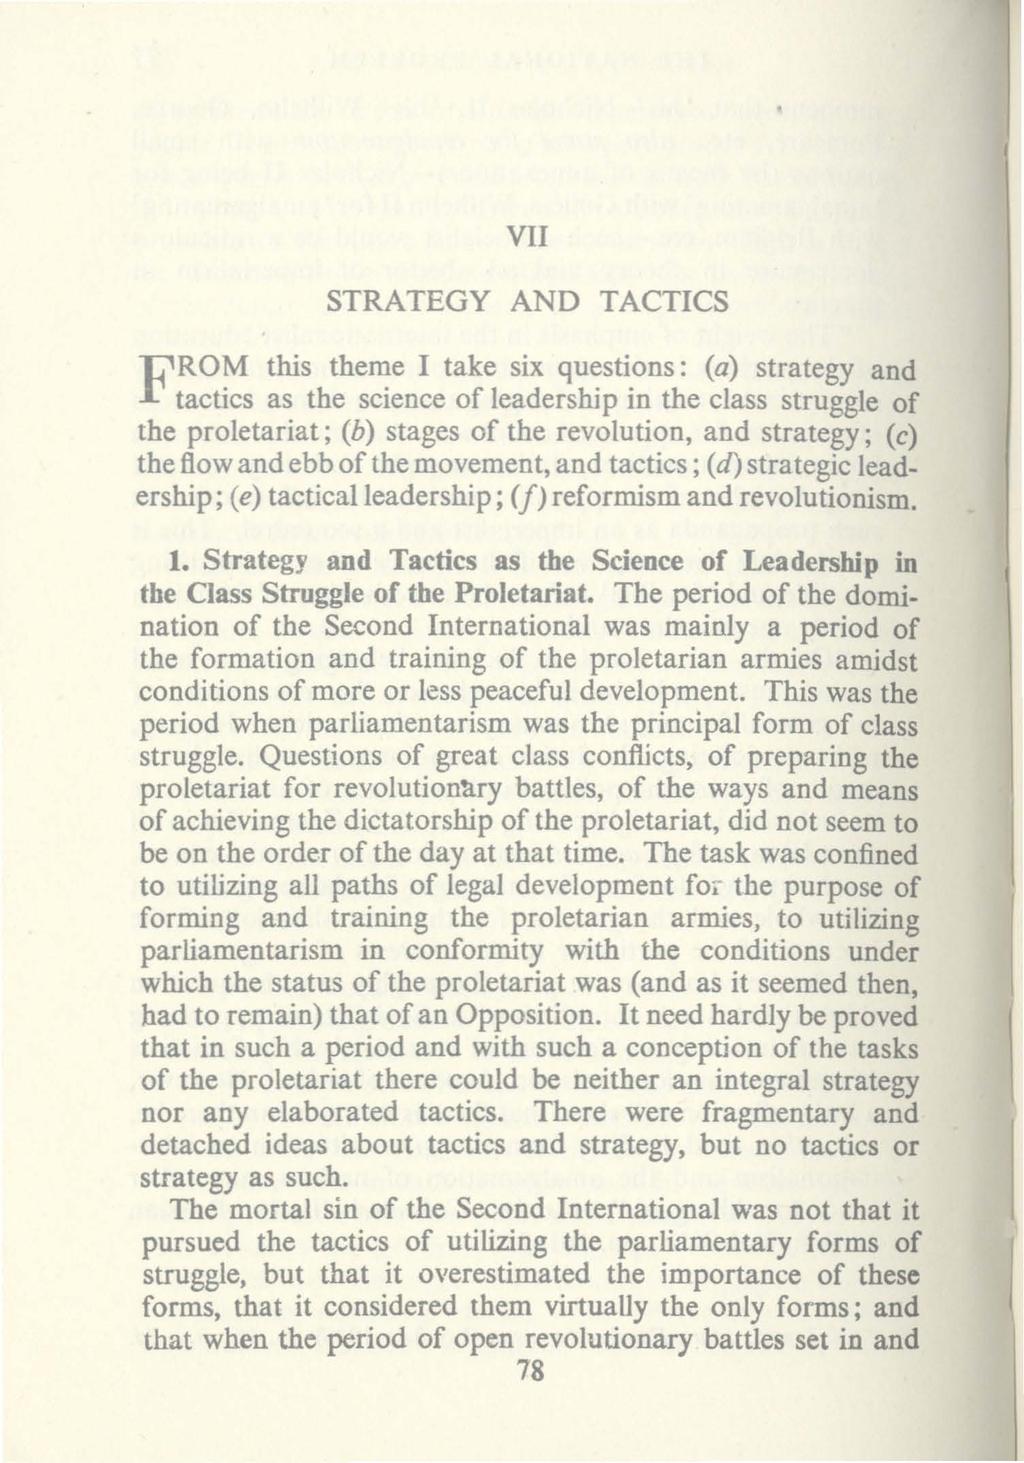 VII STRATEGY AND TACTICS F~~~s ~~Sth~h~~~n~et~~~e~~e~~~~tii~n:~e ~~s:t~~~~~l:~~ the proletariat; (b) stages of the revolution, and strategy; (c) the flow and ebb of the movement, and tactics; (d)